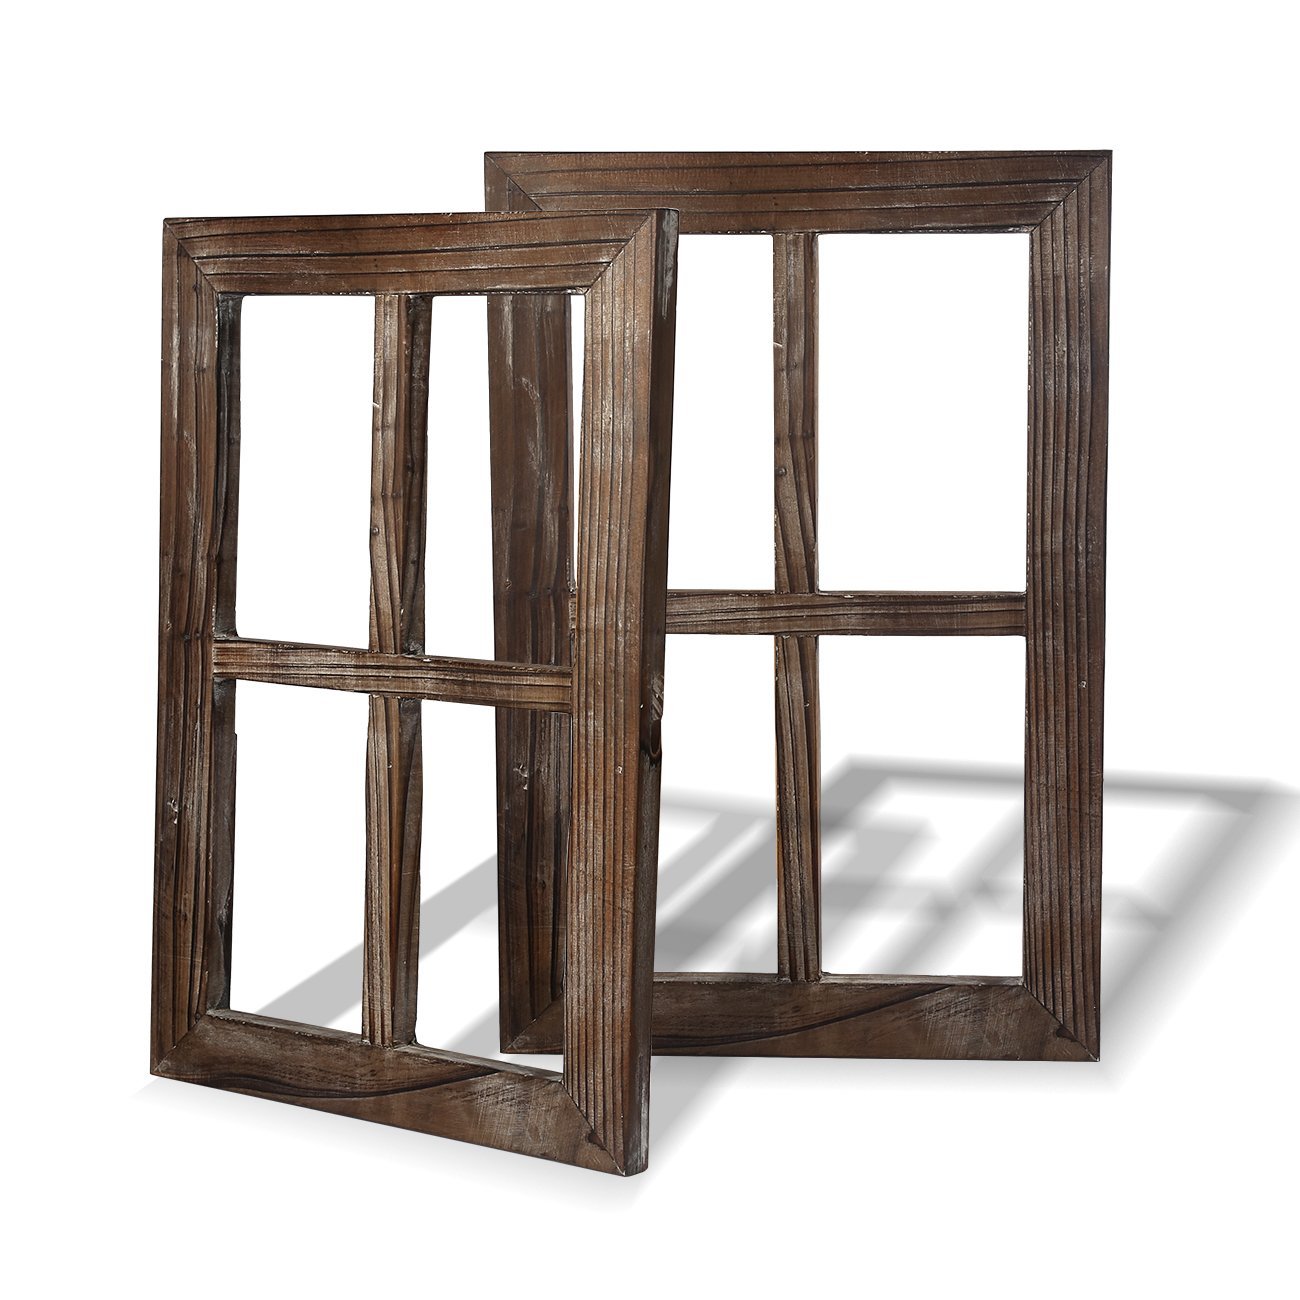 Cade Old Rustic Window Barnwood Frames -Decoration for Home or Outdoor, Not for Pictures (2, 11X15.8 inch)